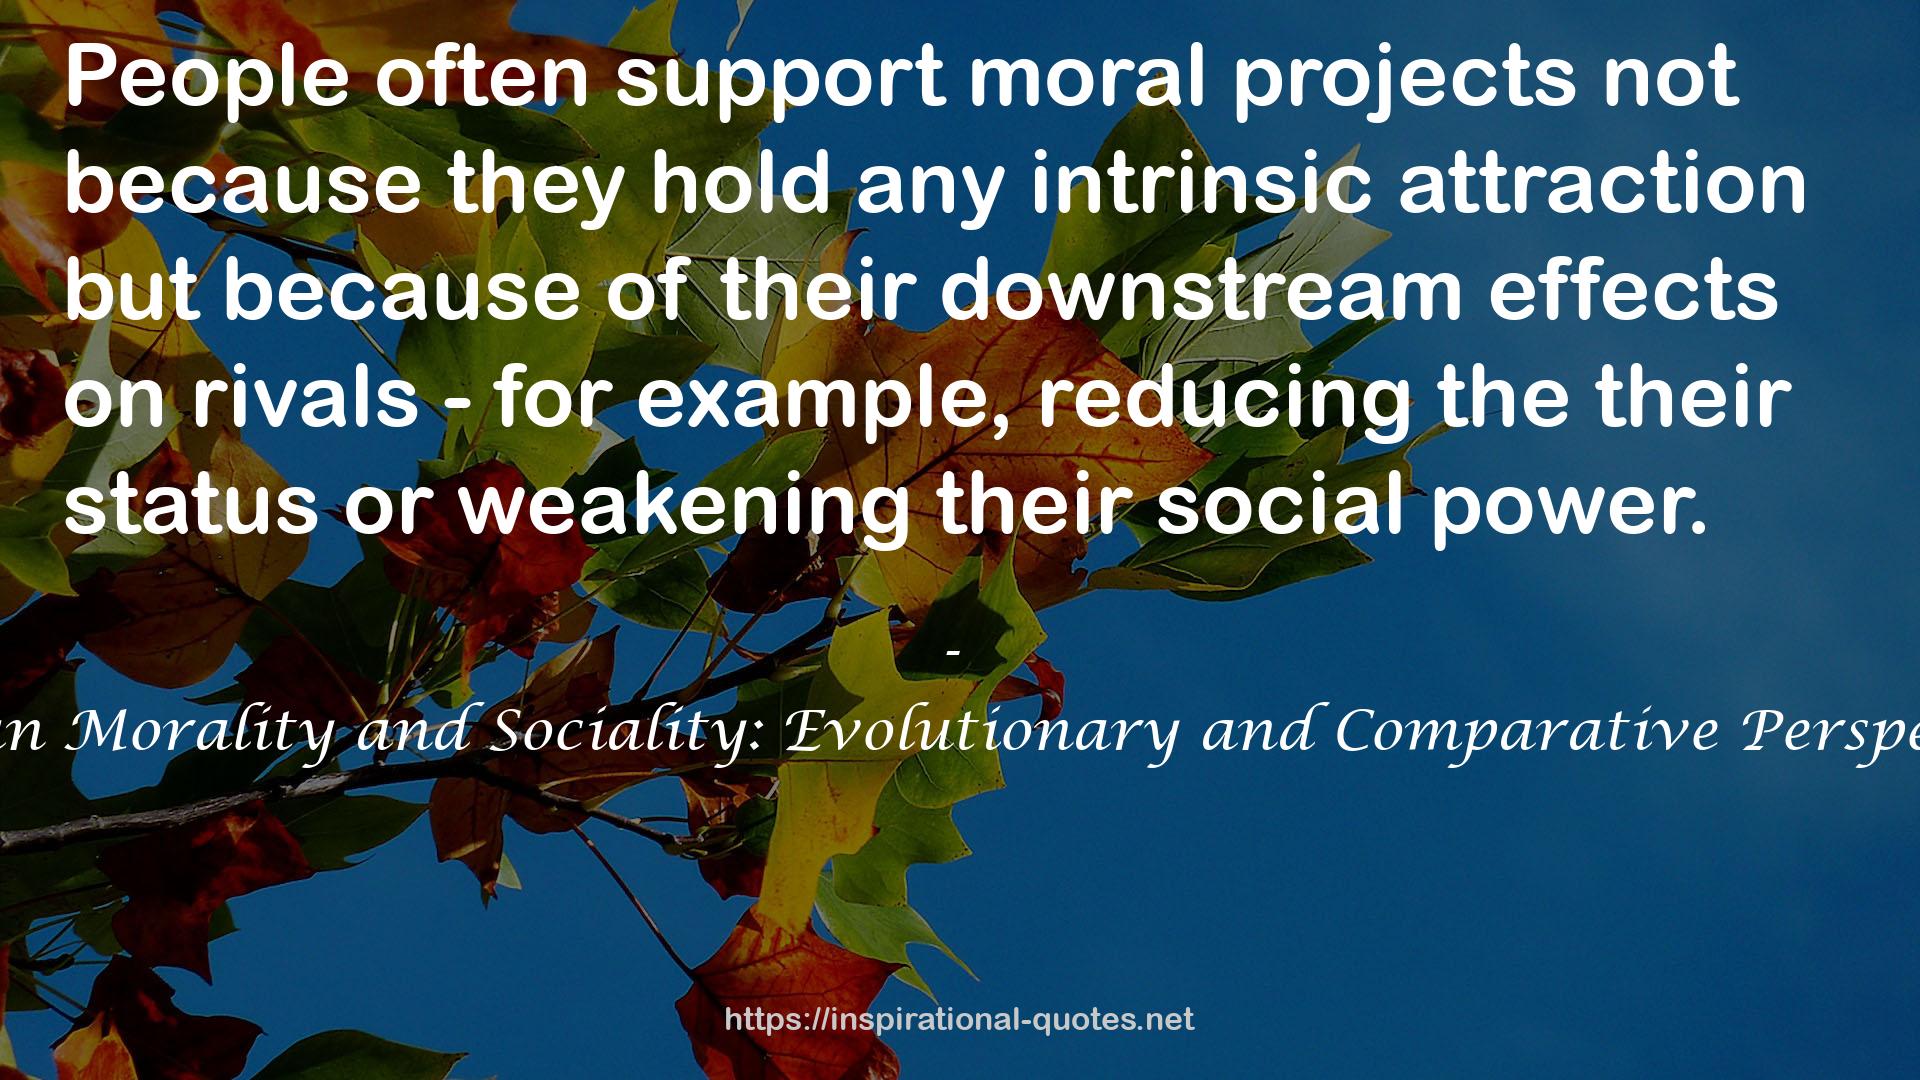 Human Morality and Sociality: Evolutionary and Comparative Perspectives QUOTES